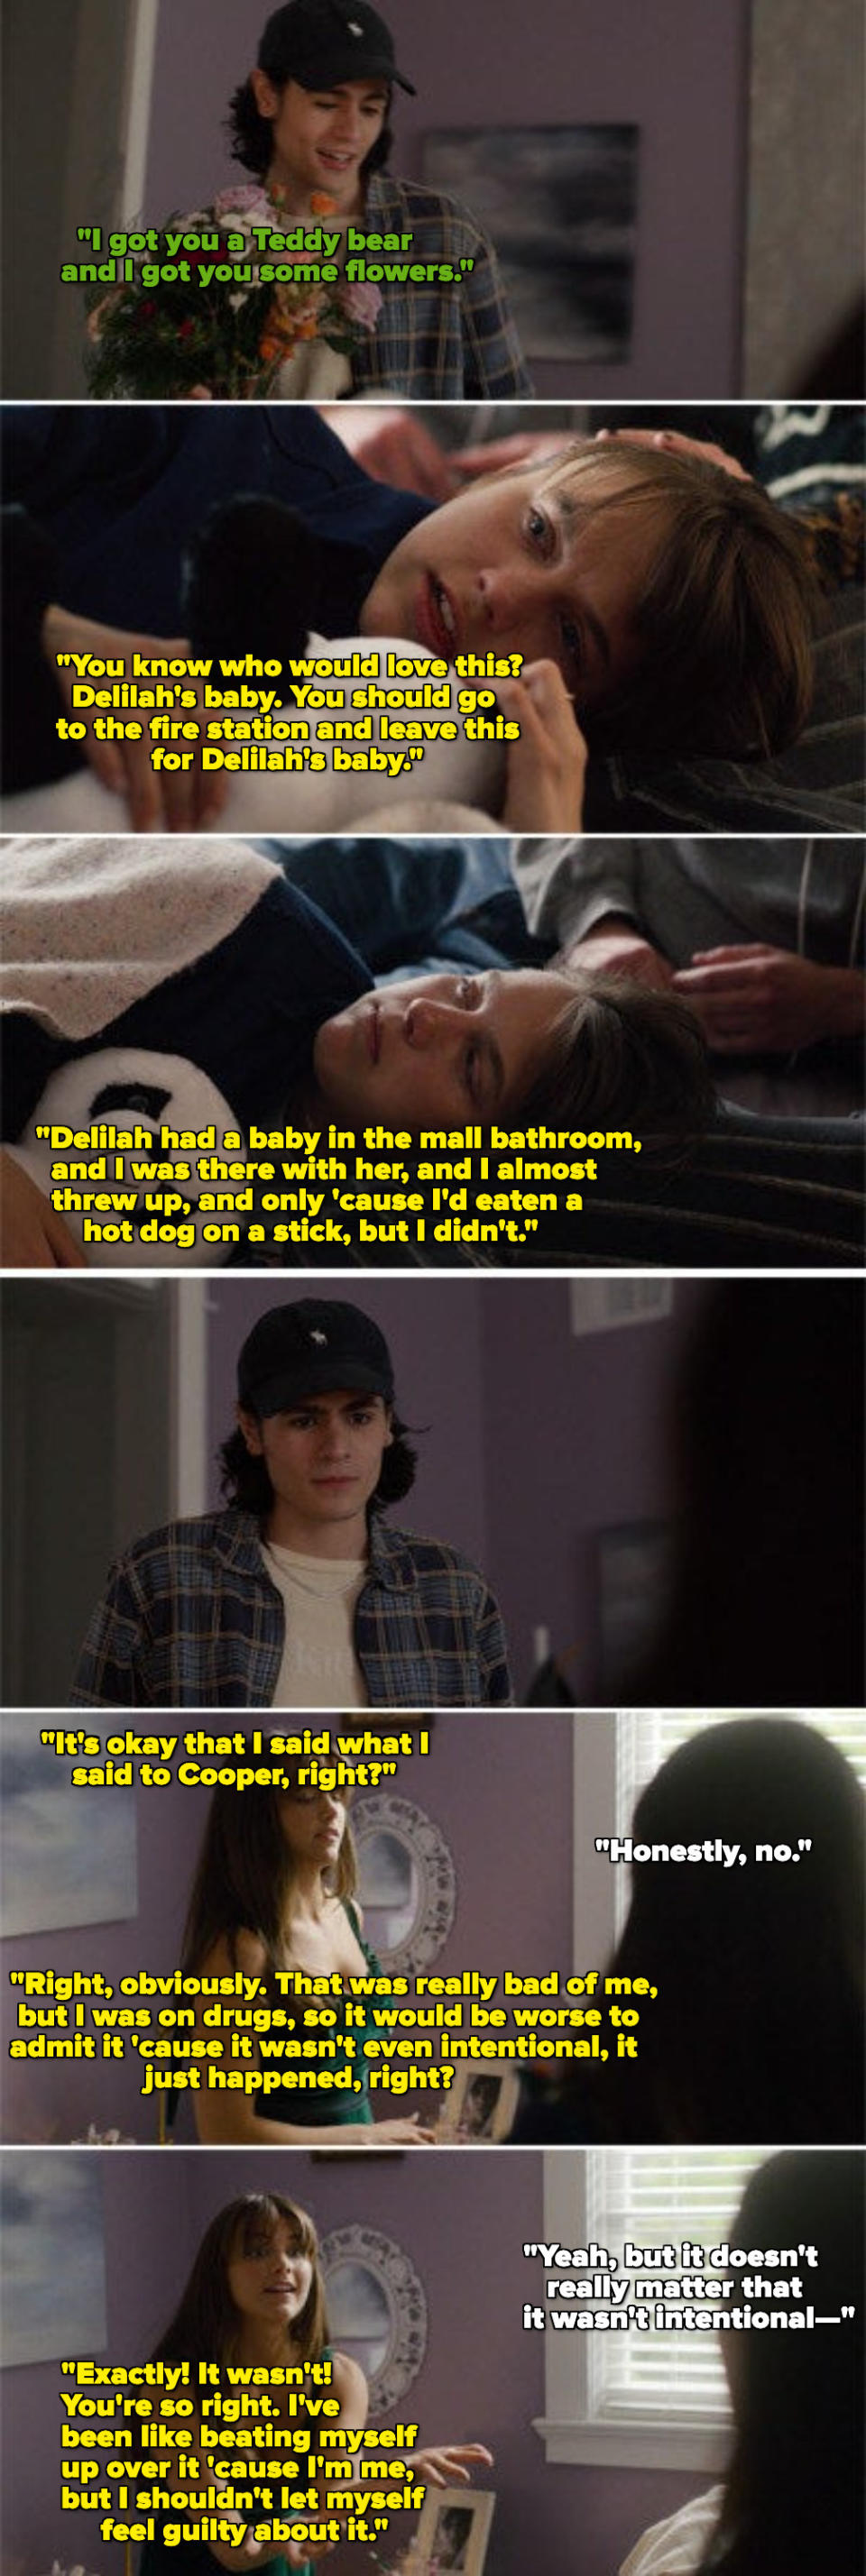 stills from the show where Delilah and Naomi and Cooper are talking about Delilah's baby